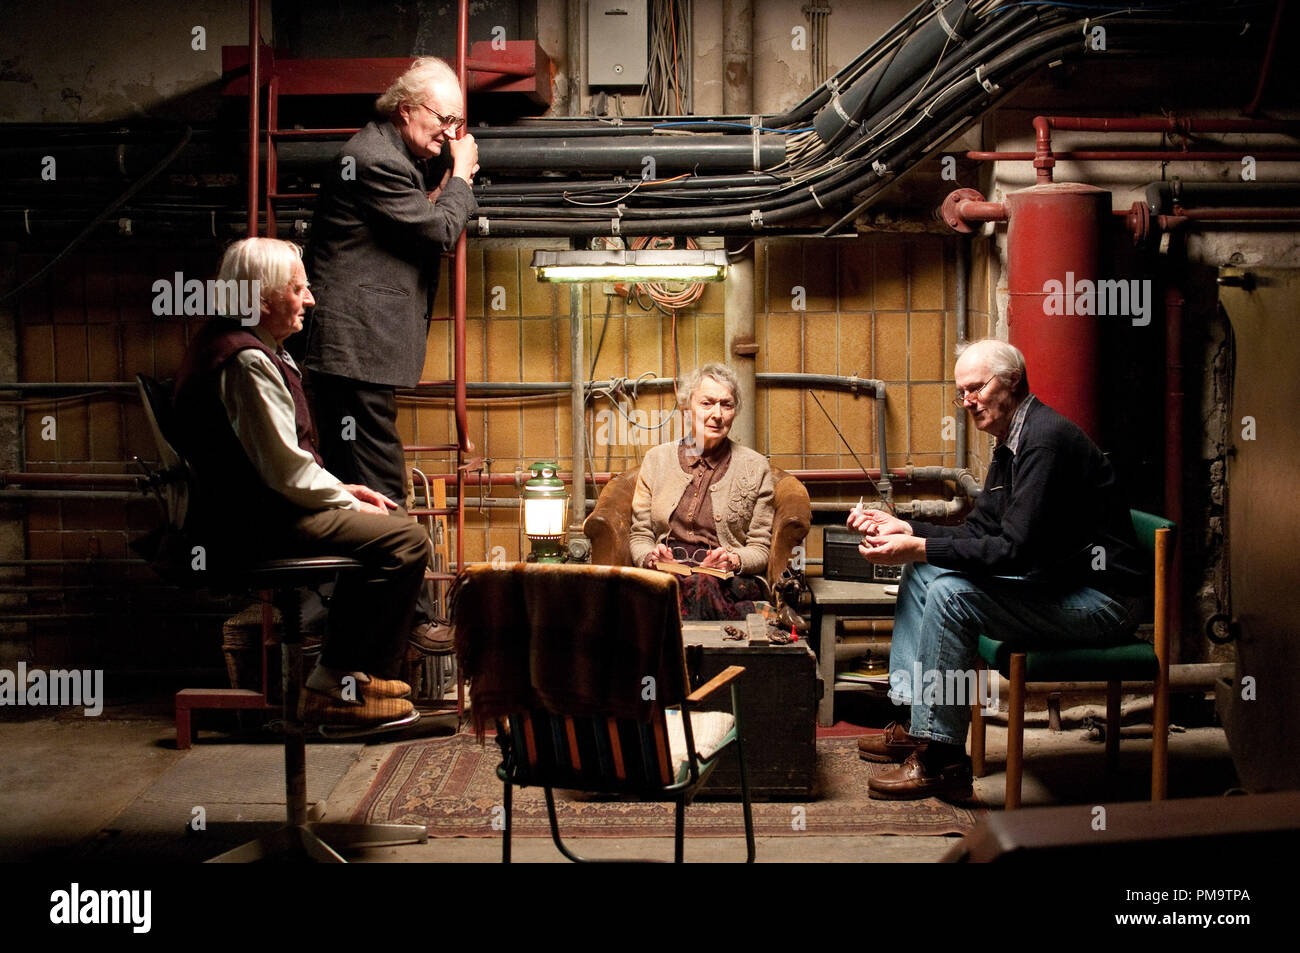 (L-r) ROBERT FYFE as Mr. Meeks, JIM BROADBENT as Timothy Cavendish, AMANDA WALKER as Veronica and RALPH RIACH as Ernie in the epic drama “CLOUD ATLAS,” distributed domestically by Warner Bros. Pictures and in select international territories. Stock Photo